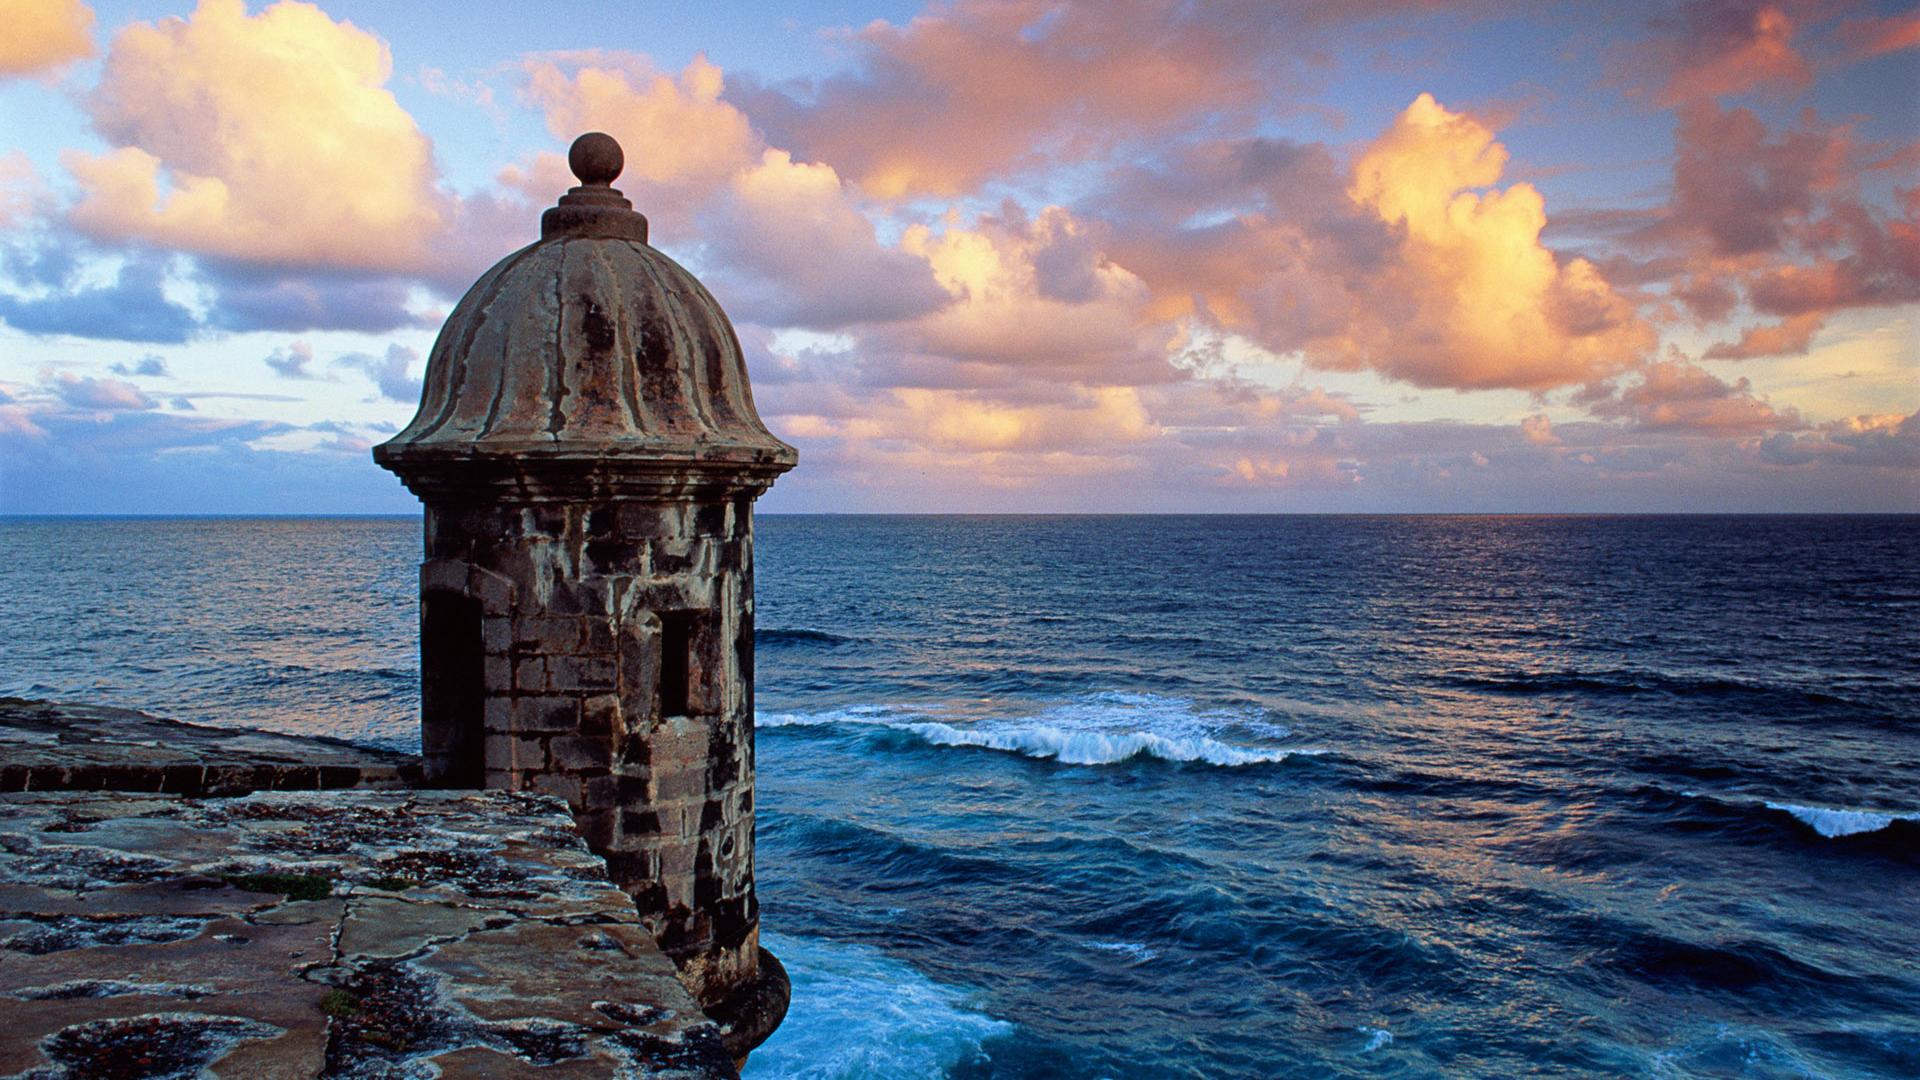 Puerto Rico Wallpapers Free - Wallpaper Cave